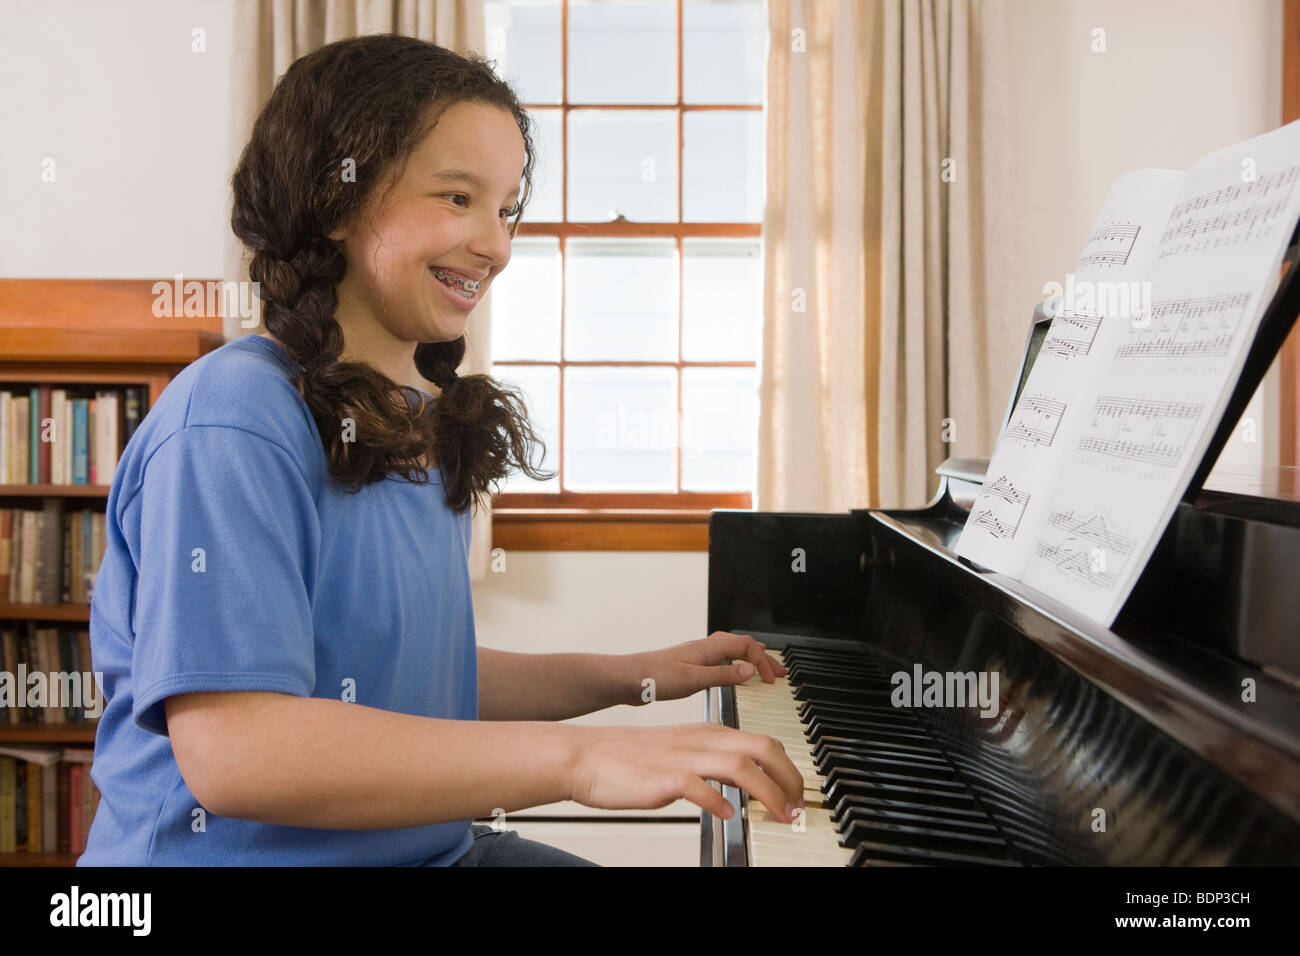 Girl reading a music sheet and playing a piano Stock Photo